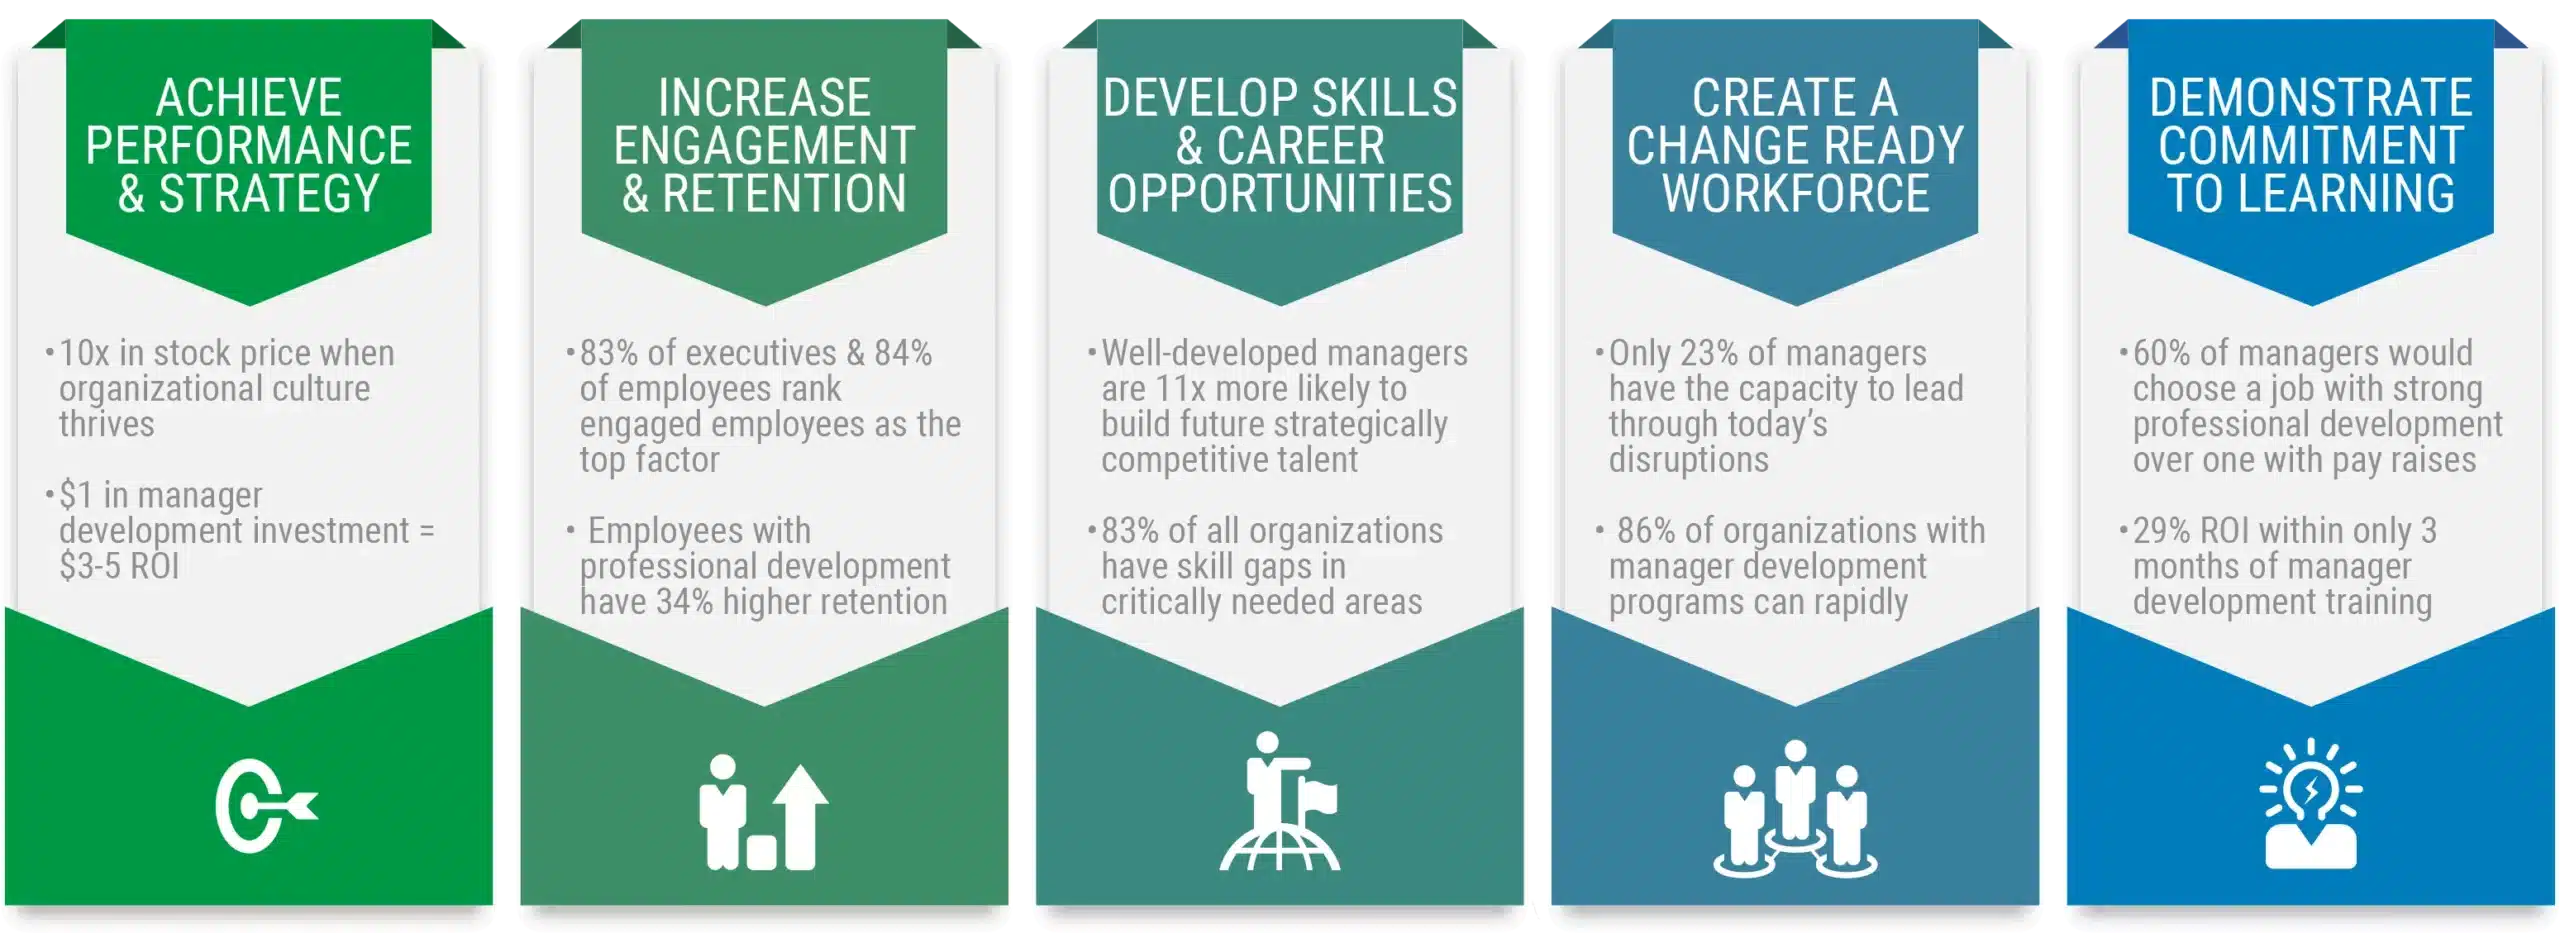 Manager Development has an outsized impact across the organization